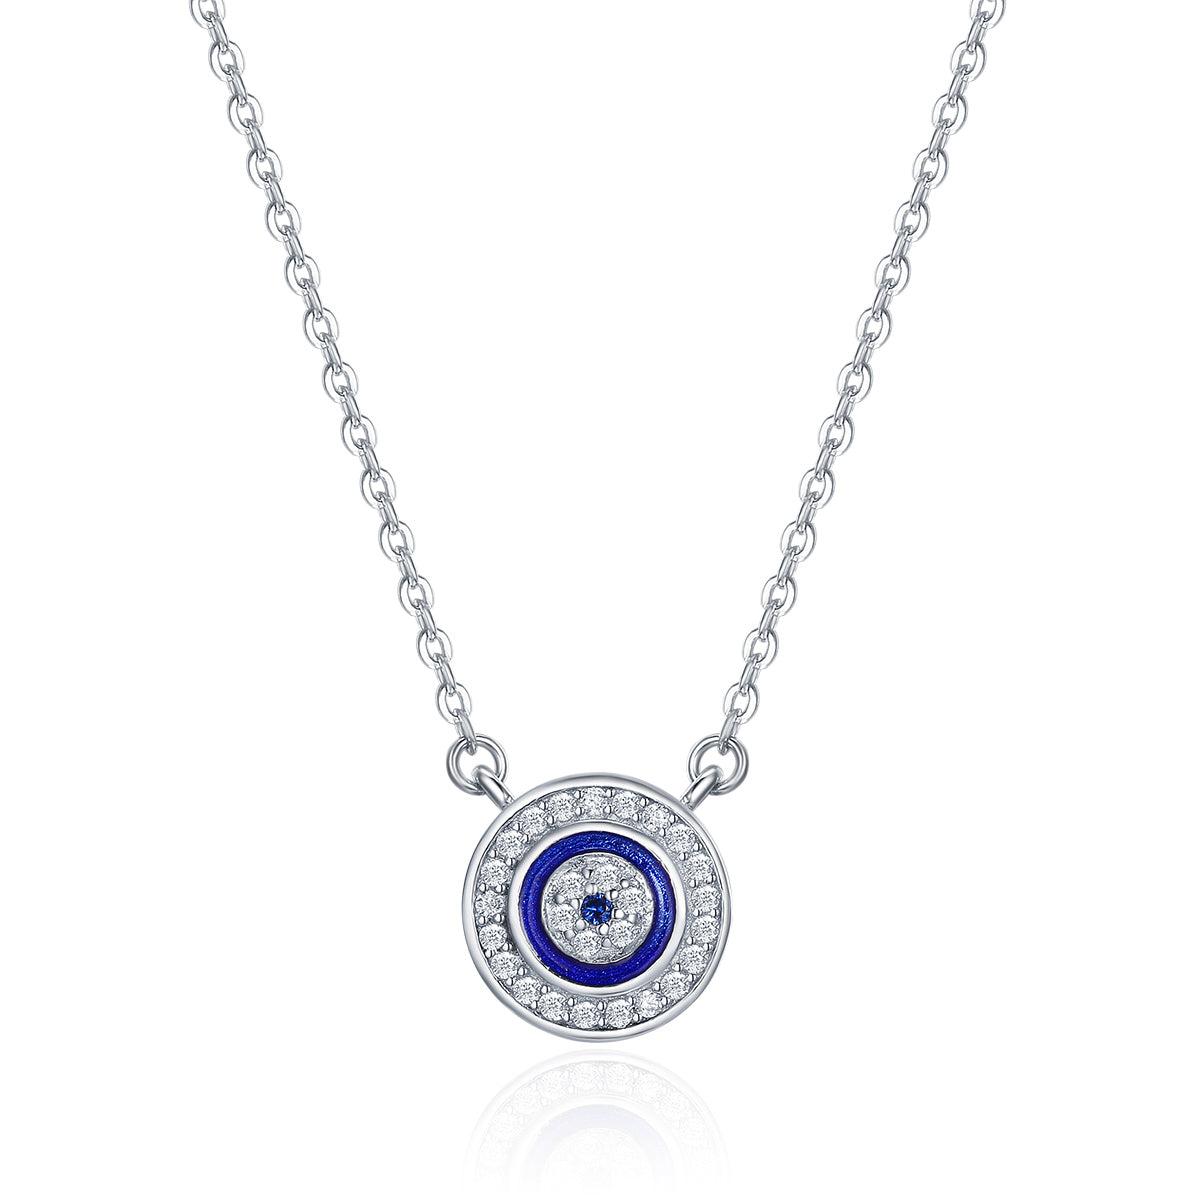 Sterling Silver Evil Eye Necklace with Cubic Zirconia-Evil Eye Necklace-Auswara